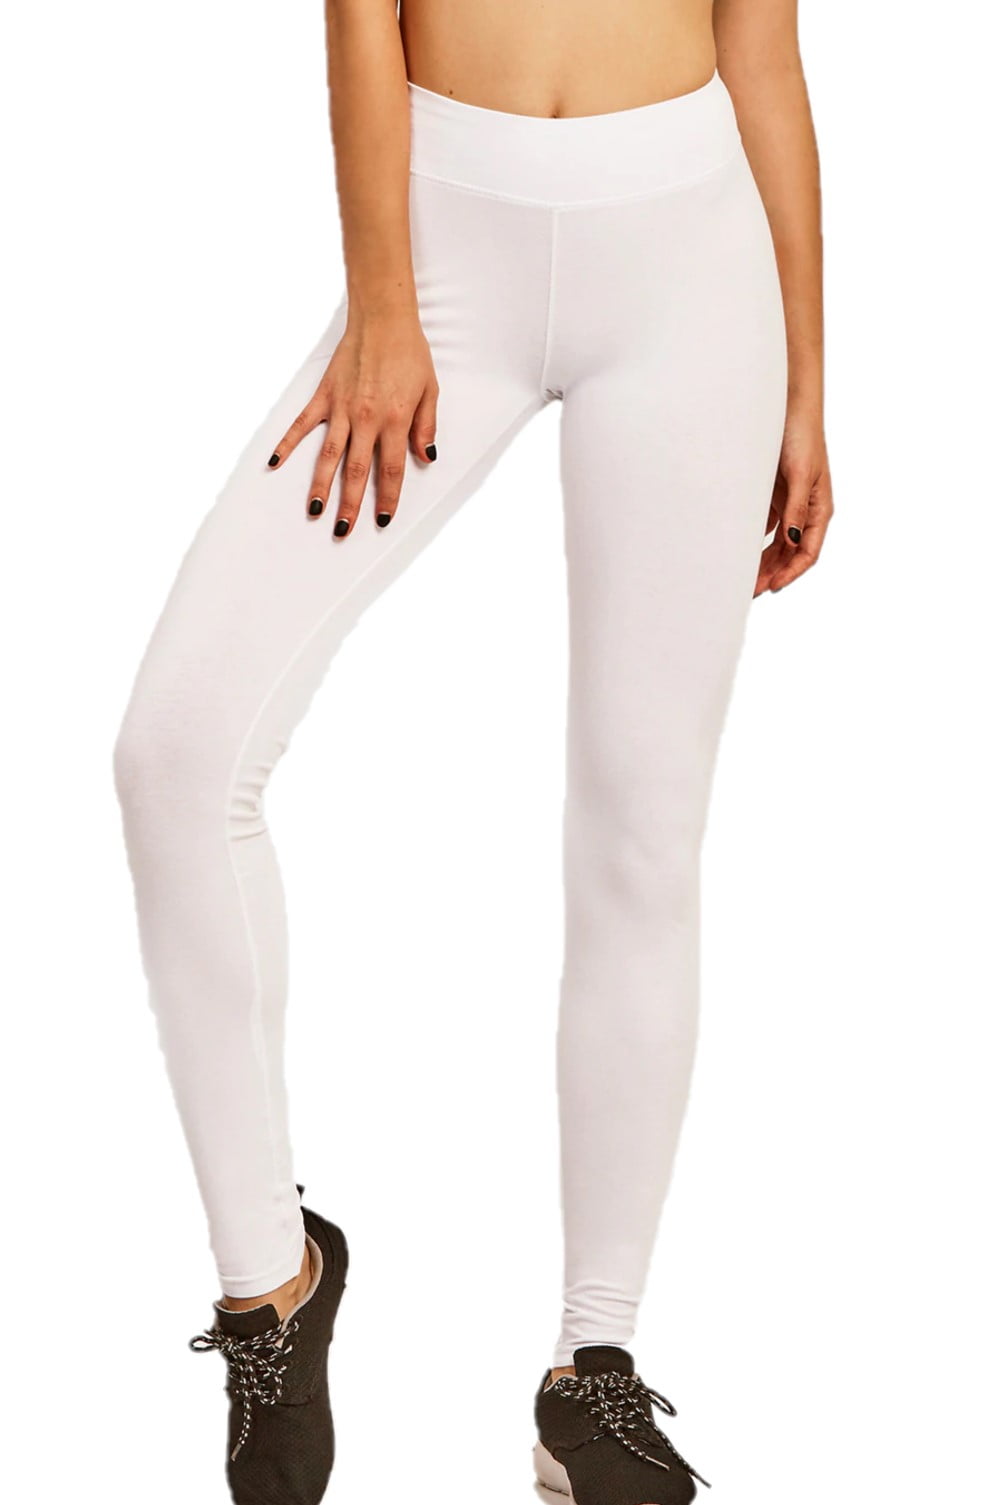 Full Length Leggings Featuring High Rise Waistband. (6 Pack) • Elasticized  High Rise Waistband • Fit Like a Glove • Pull On/Off Design • Soft and  Stretchy Content: 92% Cotton, 8% Spandex